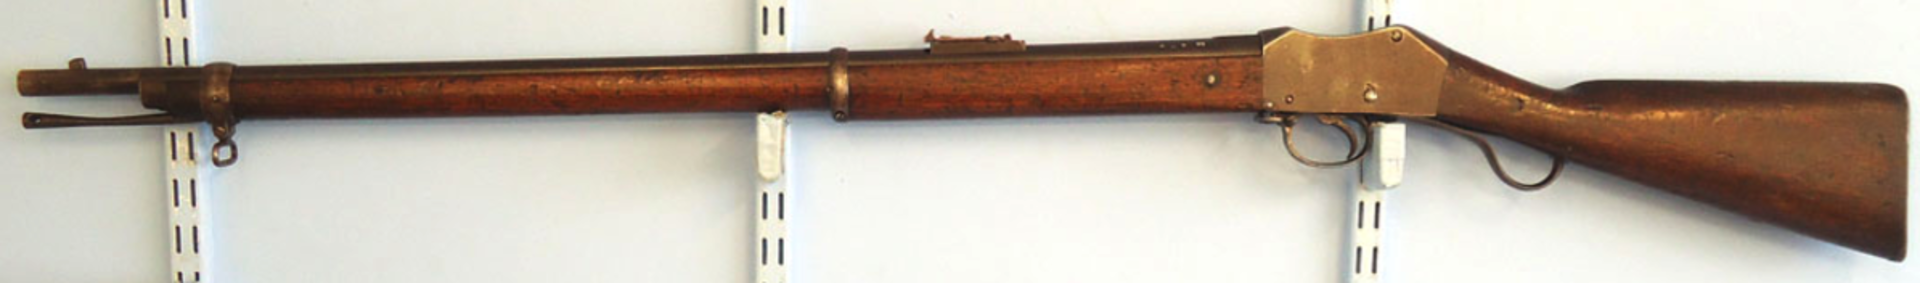 British Volunteer Pattern Private Purchase Martini Henry MK II 577-450 British Service Rifle By T - Image 2 of 3